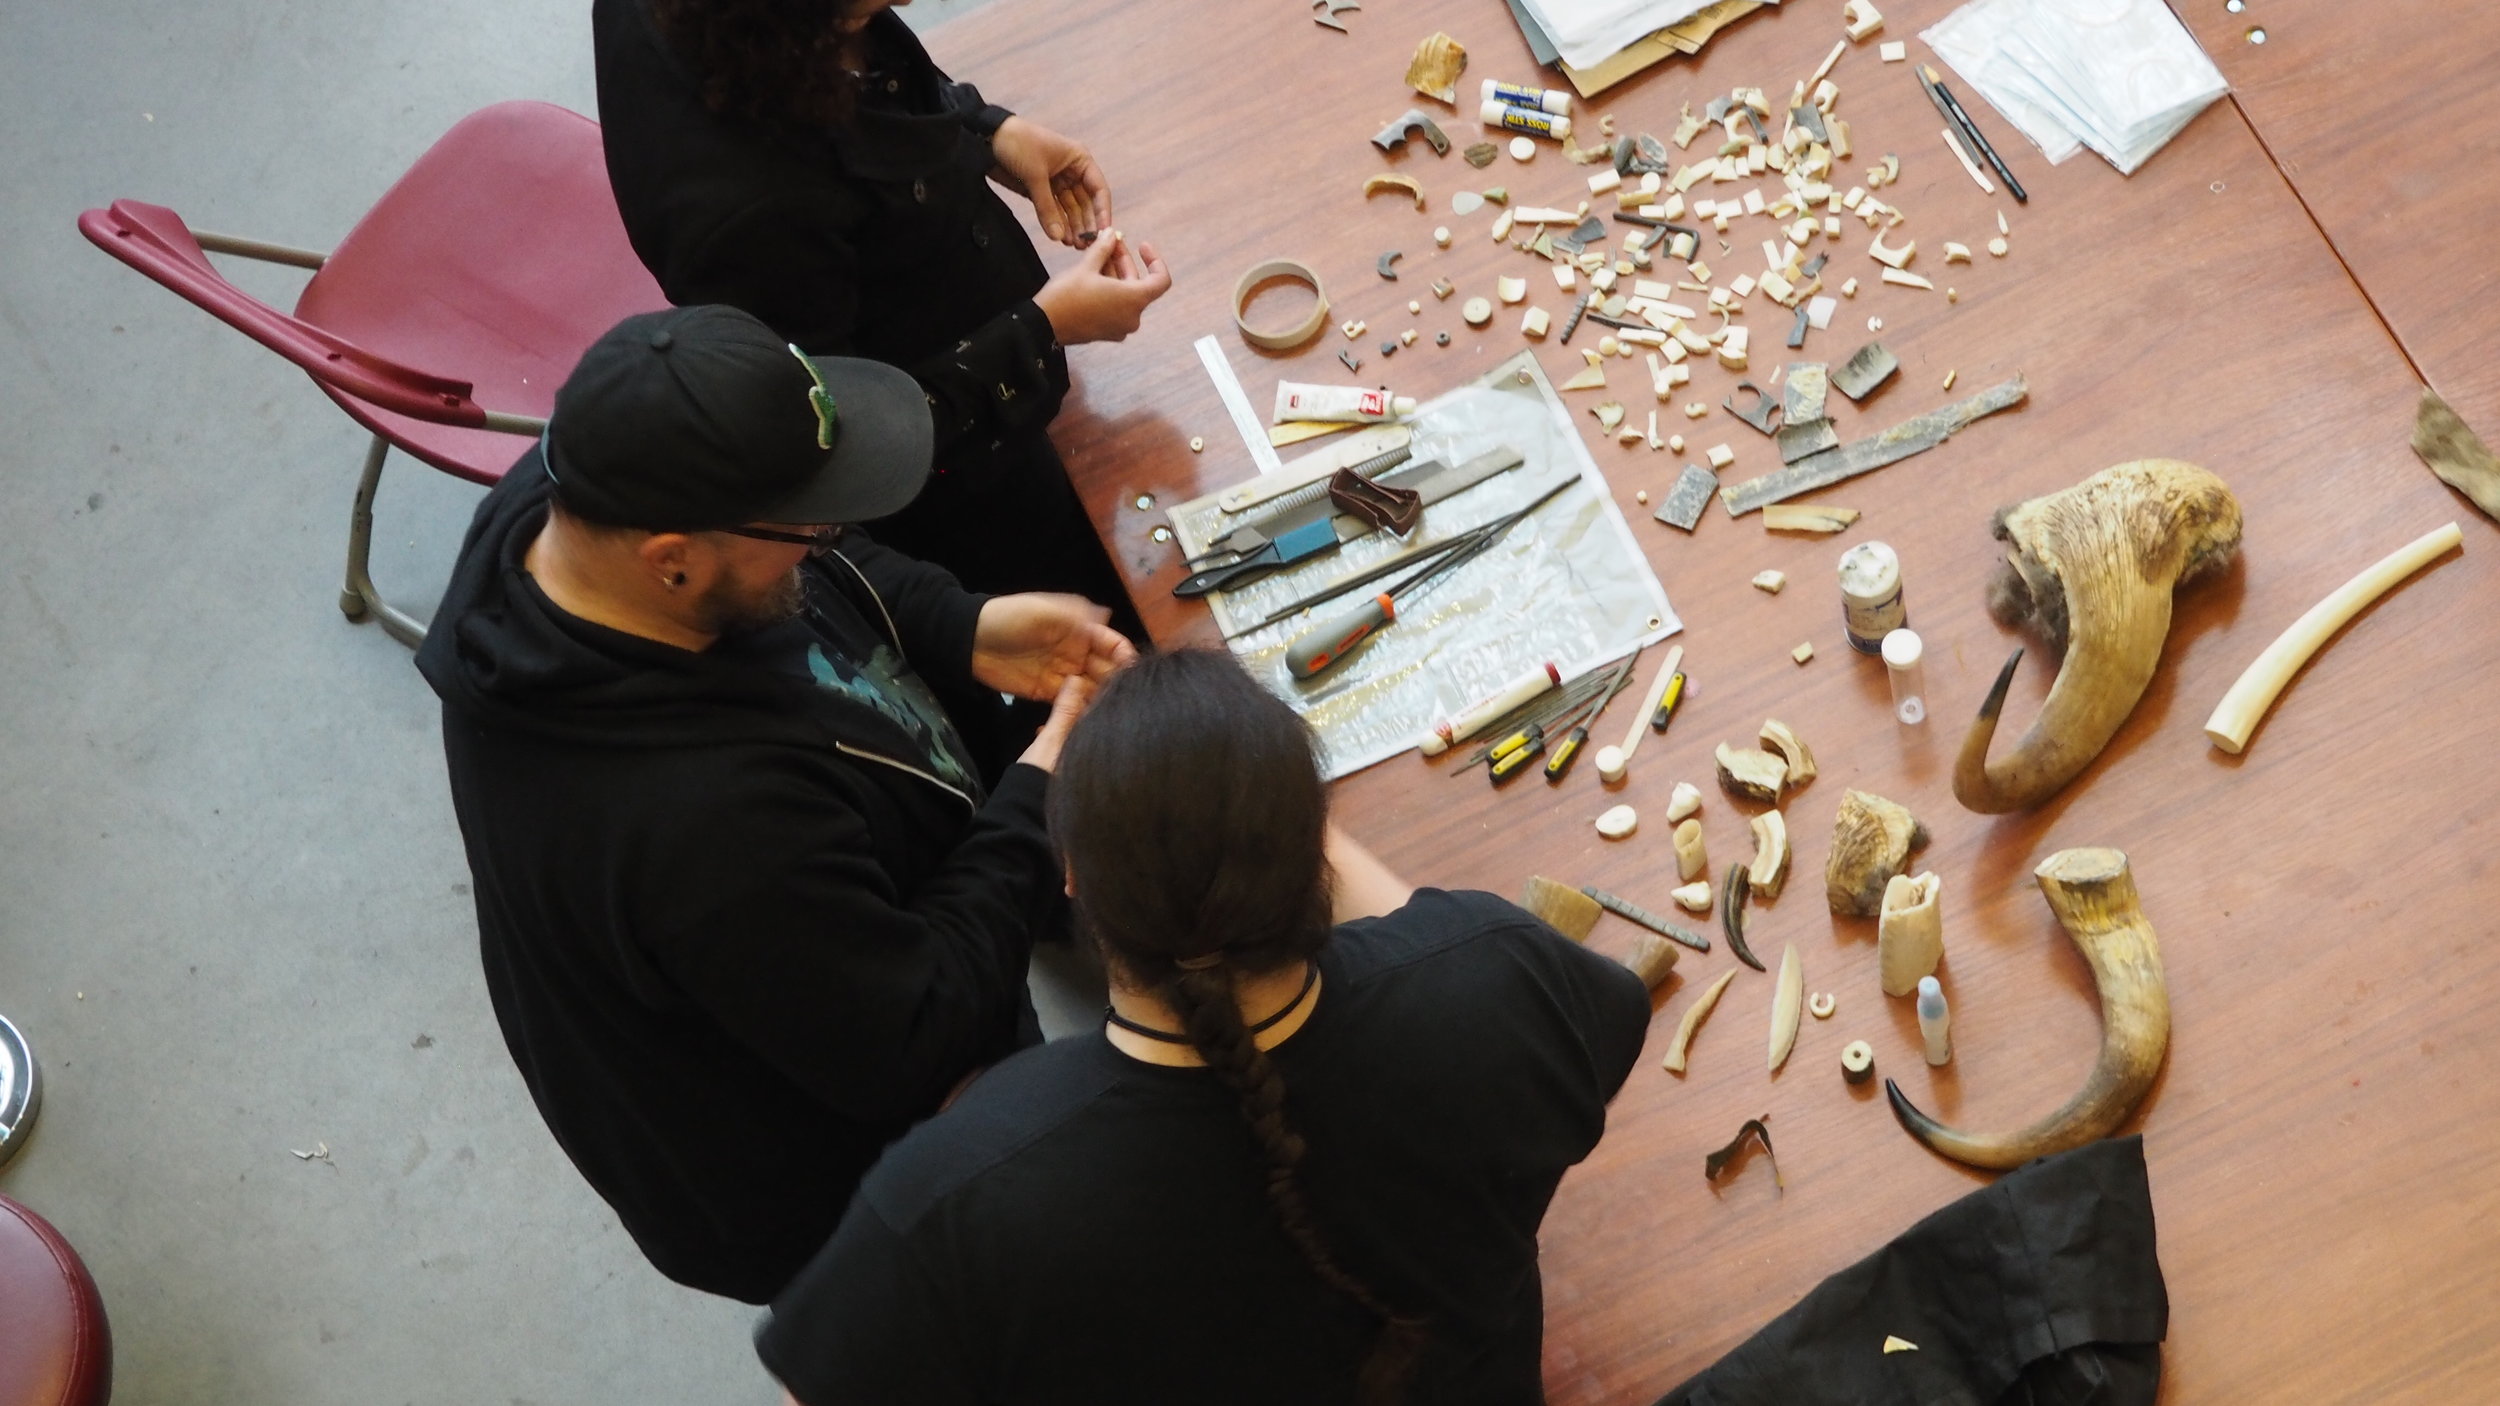  Art Hive workshop, “Working with Northern Organic Materials and Jewelry Construction,” Concordia University, April 26, 2019. 